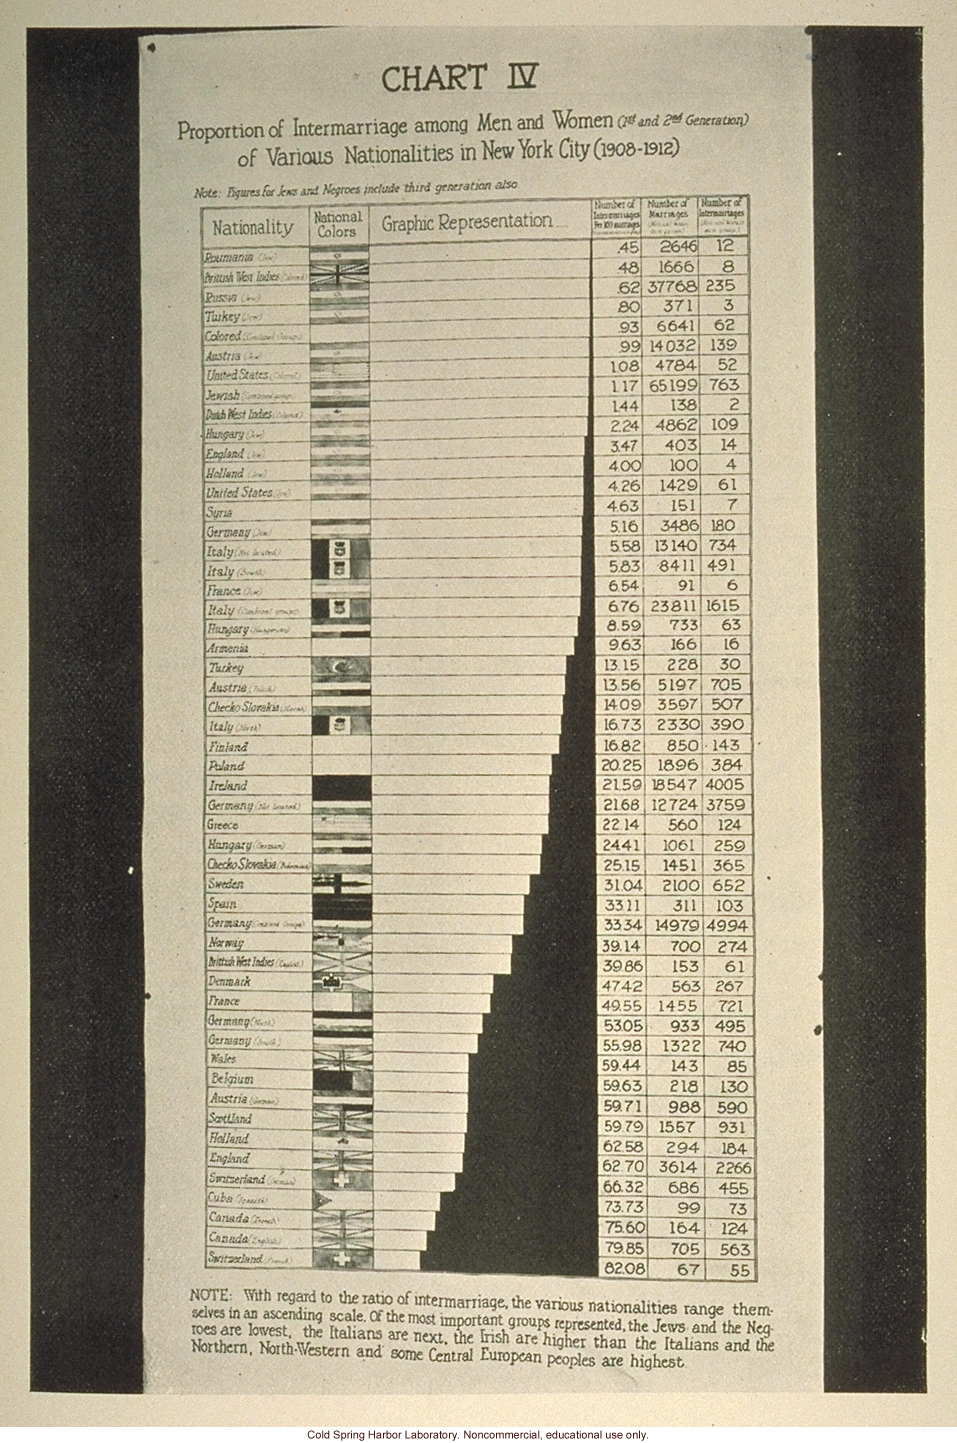 &quote;Chart IV, proportion of intermarriage among men and women of various nationalities in New York City (1908-1912)&quote;